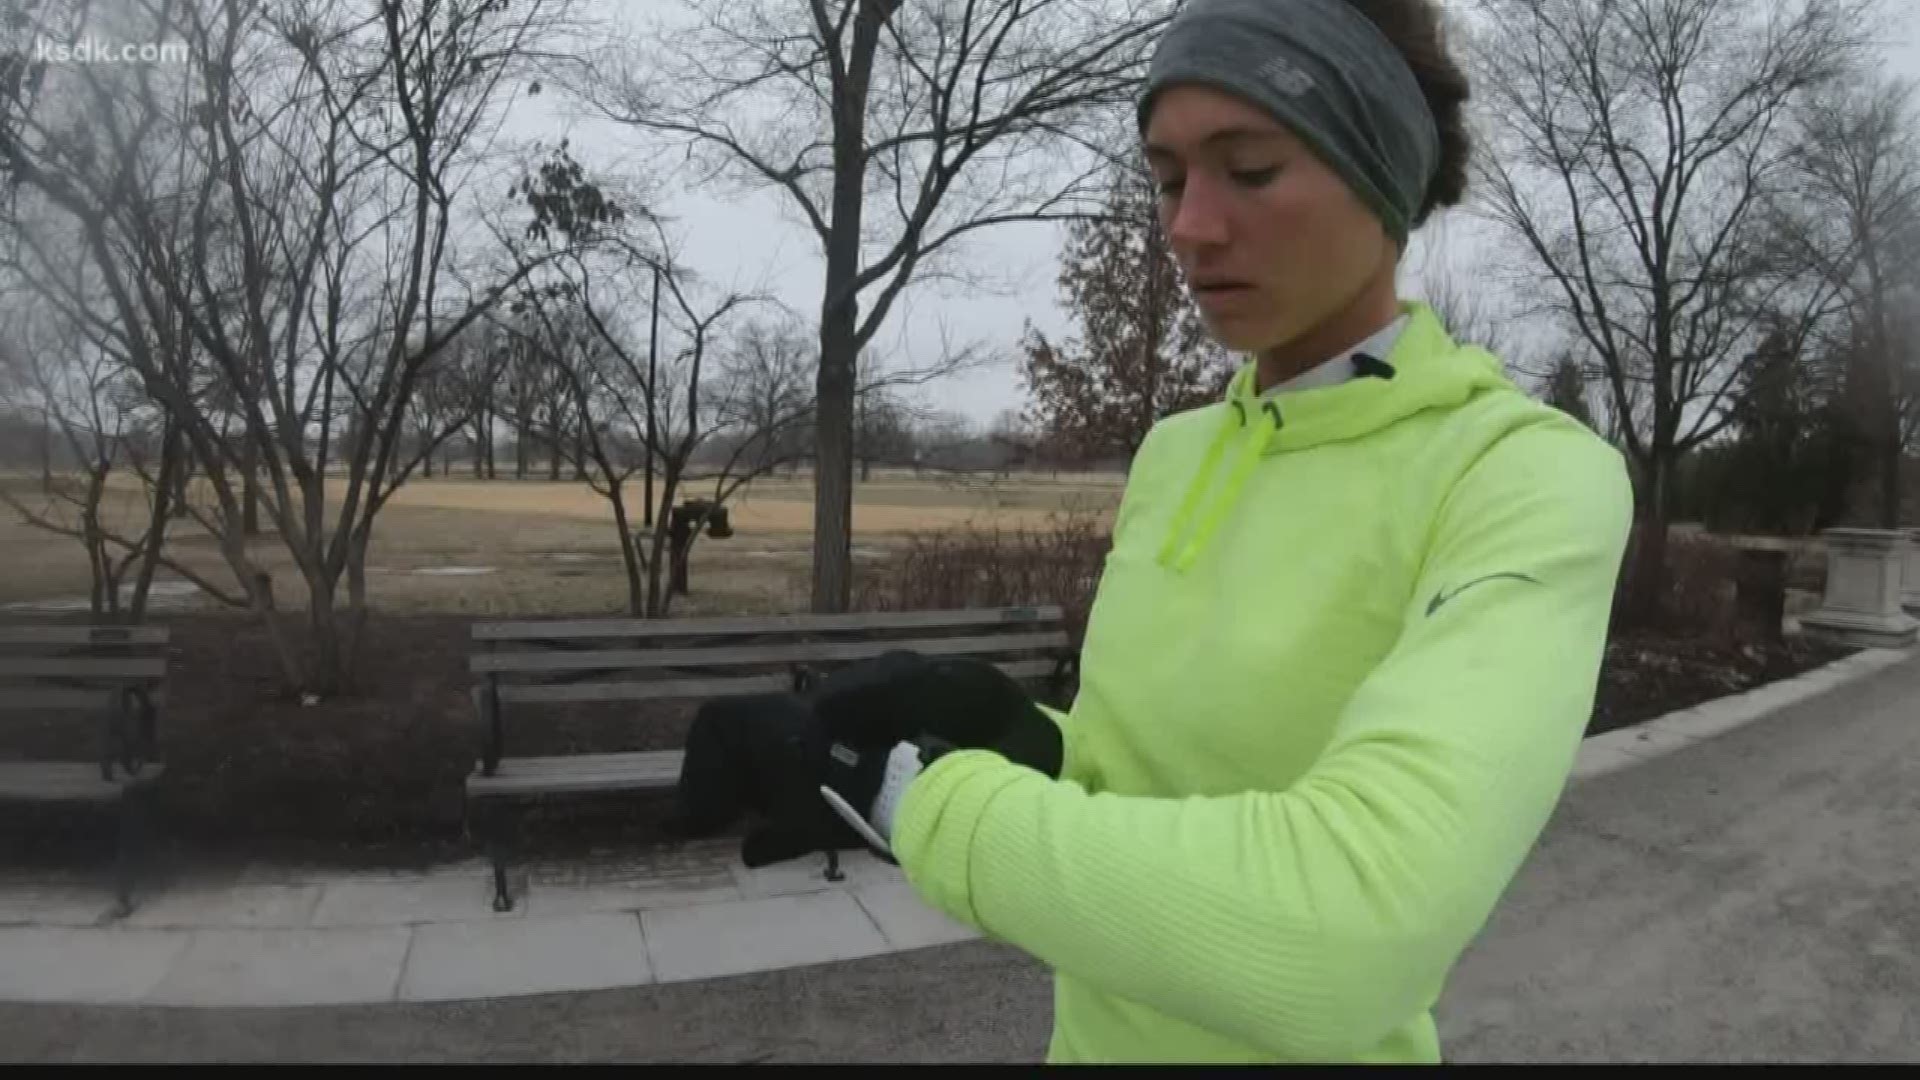 Julia Kohnen is a 27-year-old who doesn’t have a long and storied career as a runner, but she will compete for a spot on Team USA as a marathoner